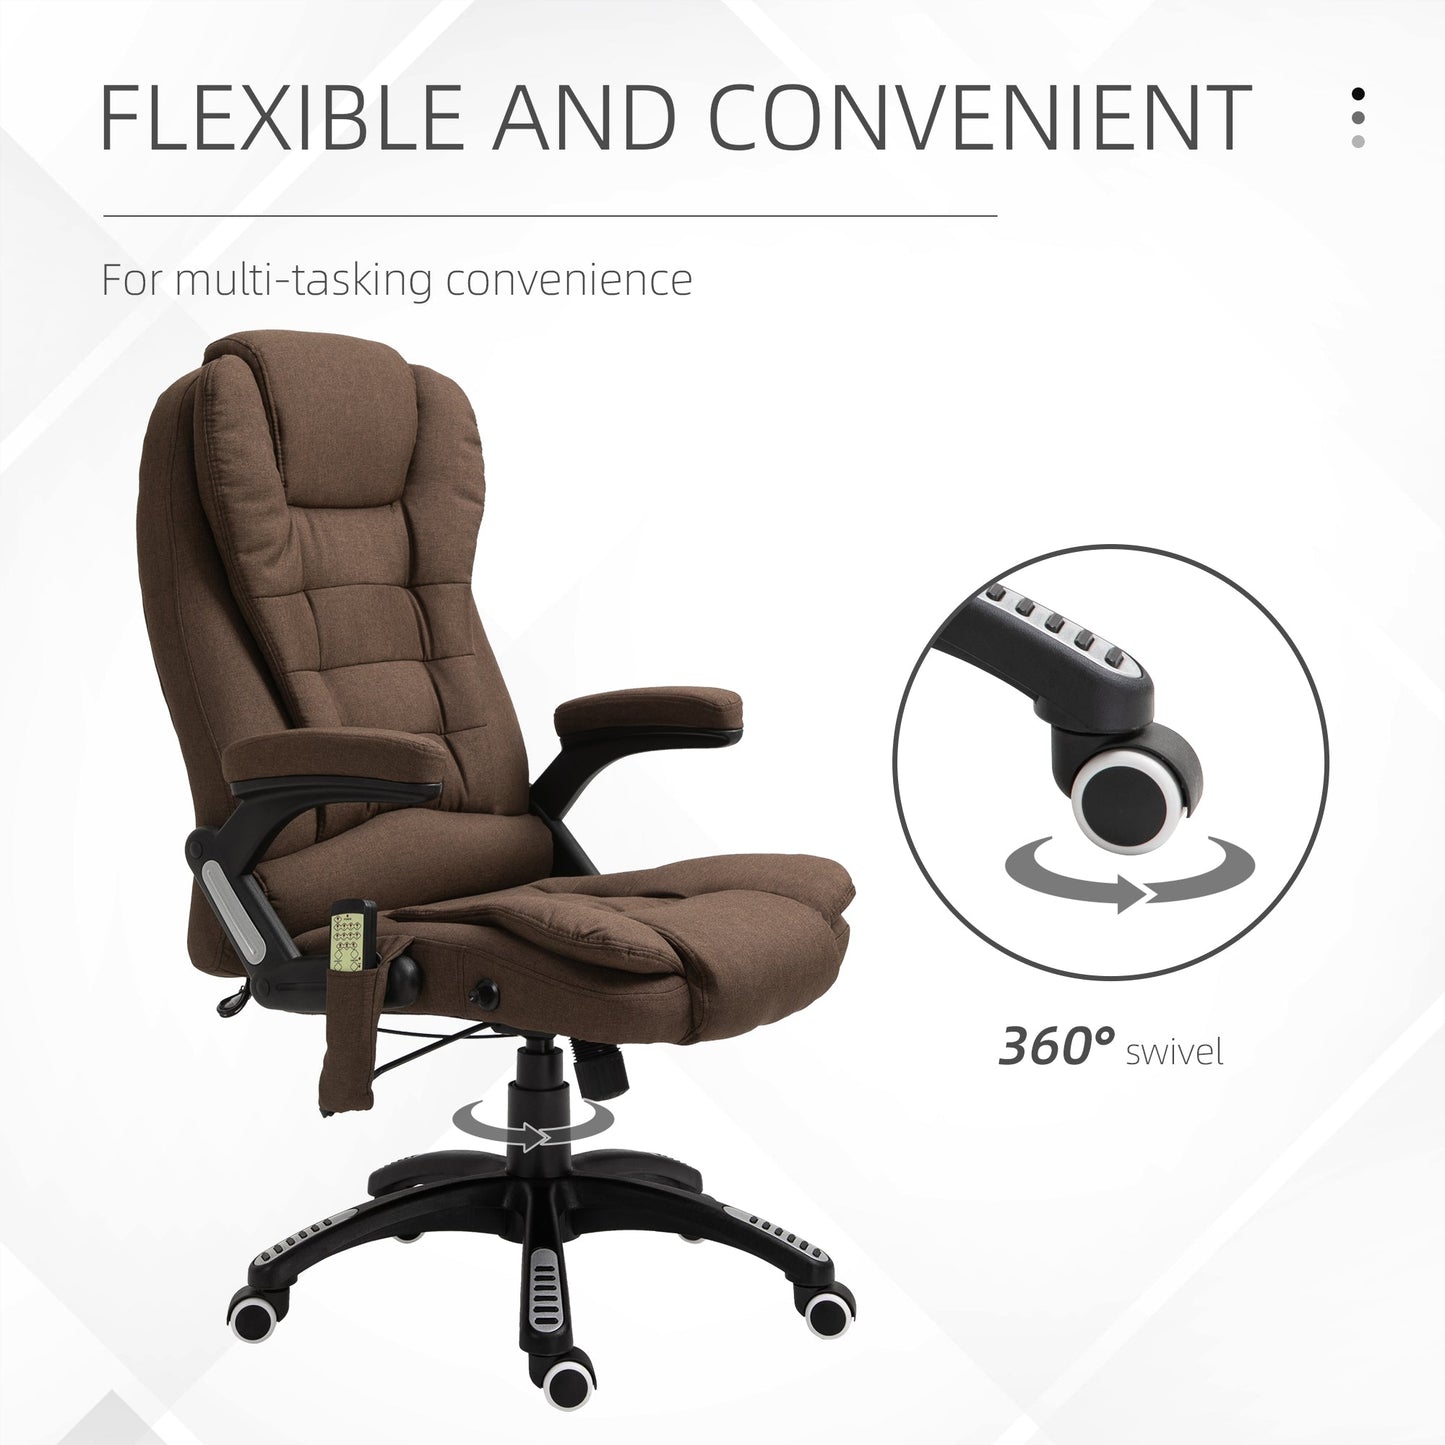 6 Point Vibrating Massage Office Chair High Back Executive Chair with Reclining Back, Swivel Wheels, Brown at Gallery Canada